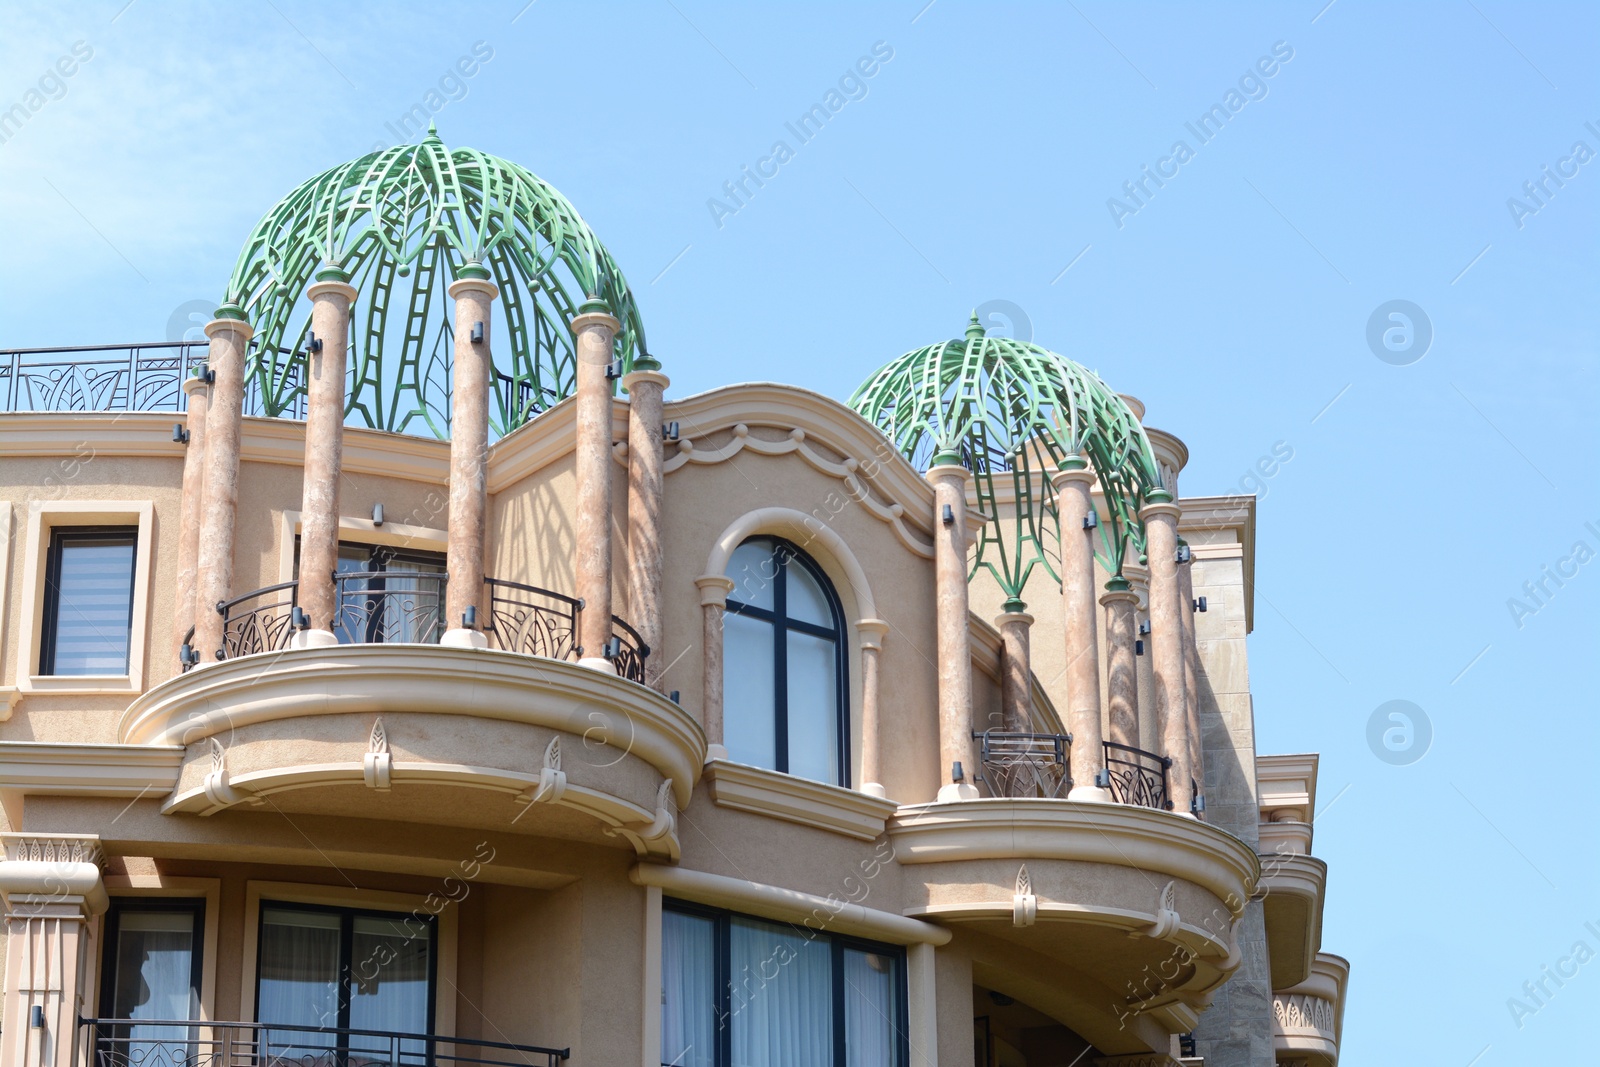 Photo of Exterior of beautiful building with decorated balconies against blue sky